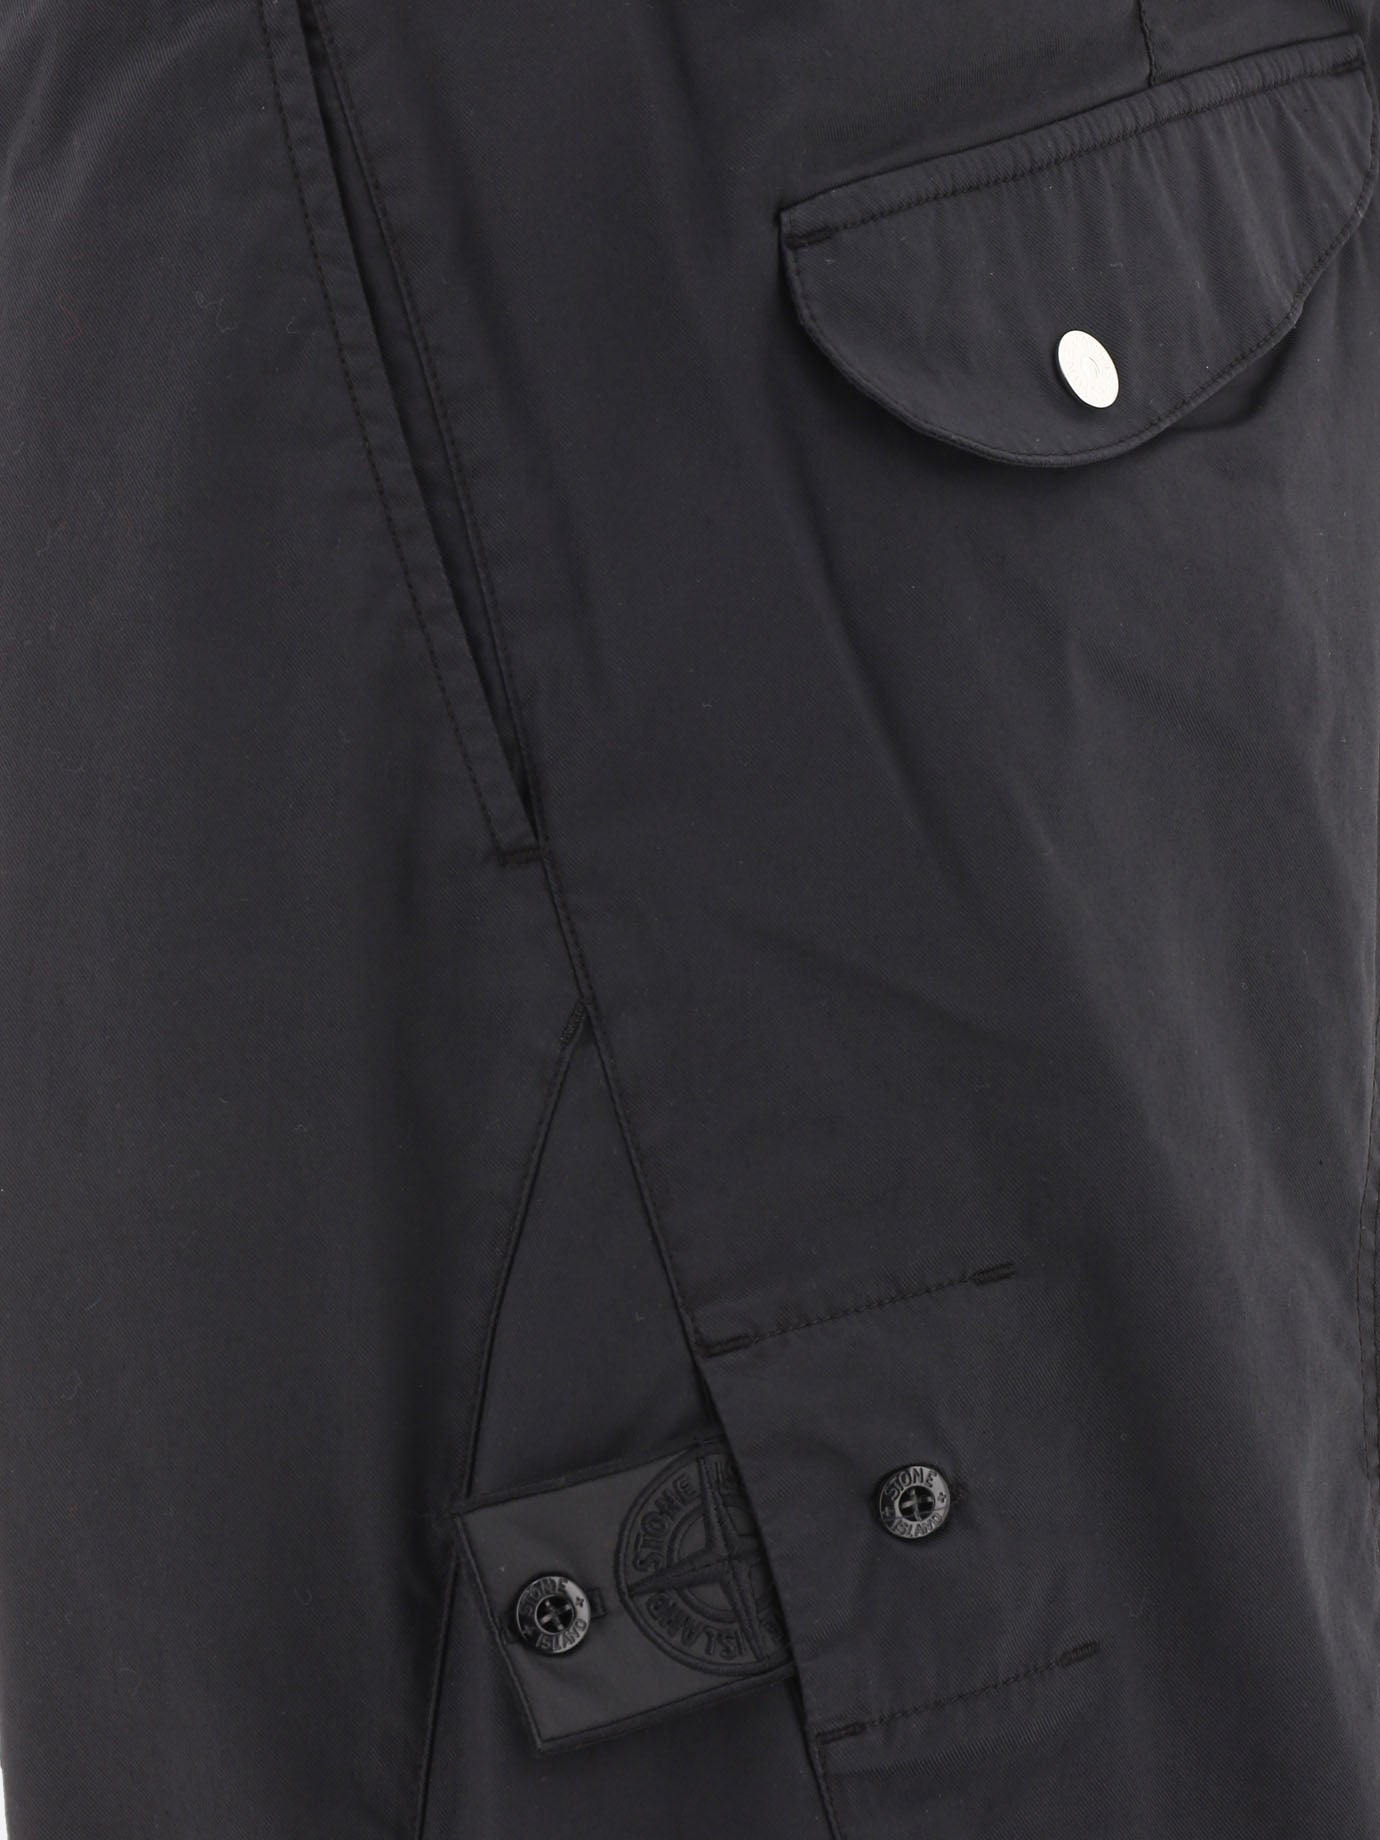 "Compass" cargo trousers